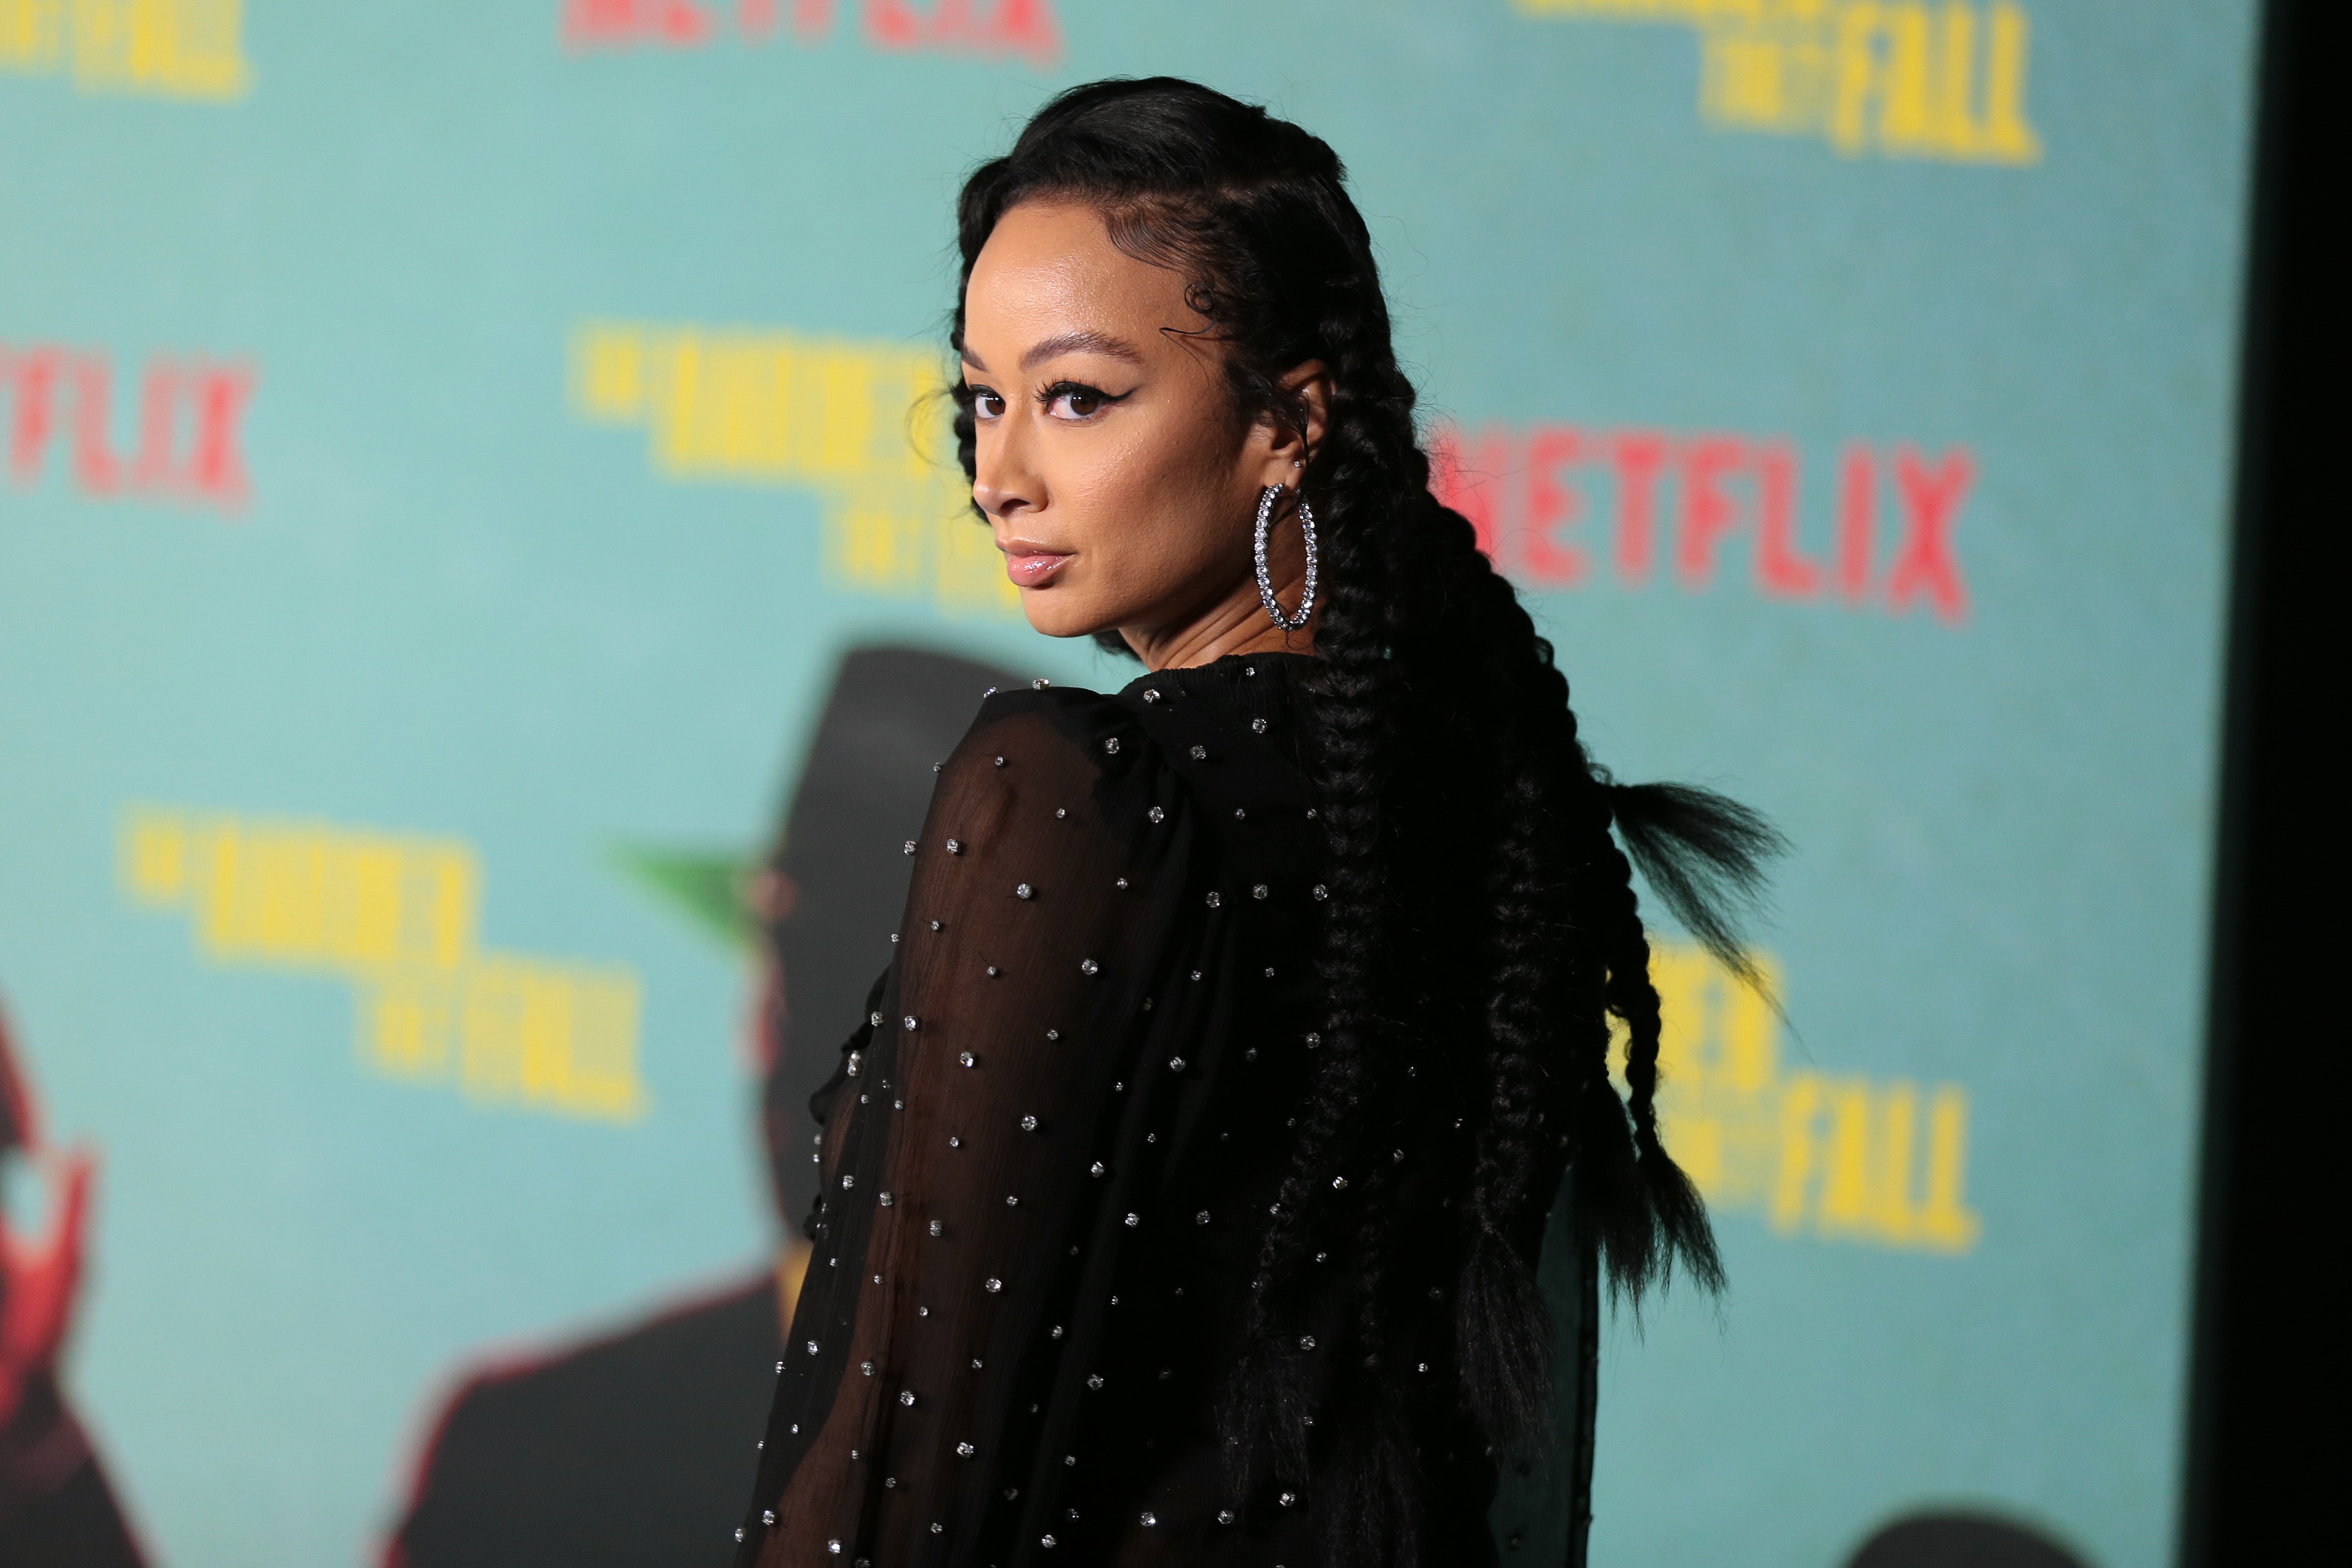 Draya Michele attends the premiere Of "The Harder They Fall" at Shrine Auditorium and Expo Hall on October 13, 2021, in Los Angeles, California. | Source: Getty Images